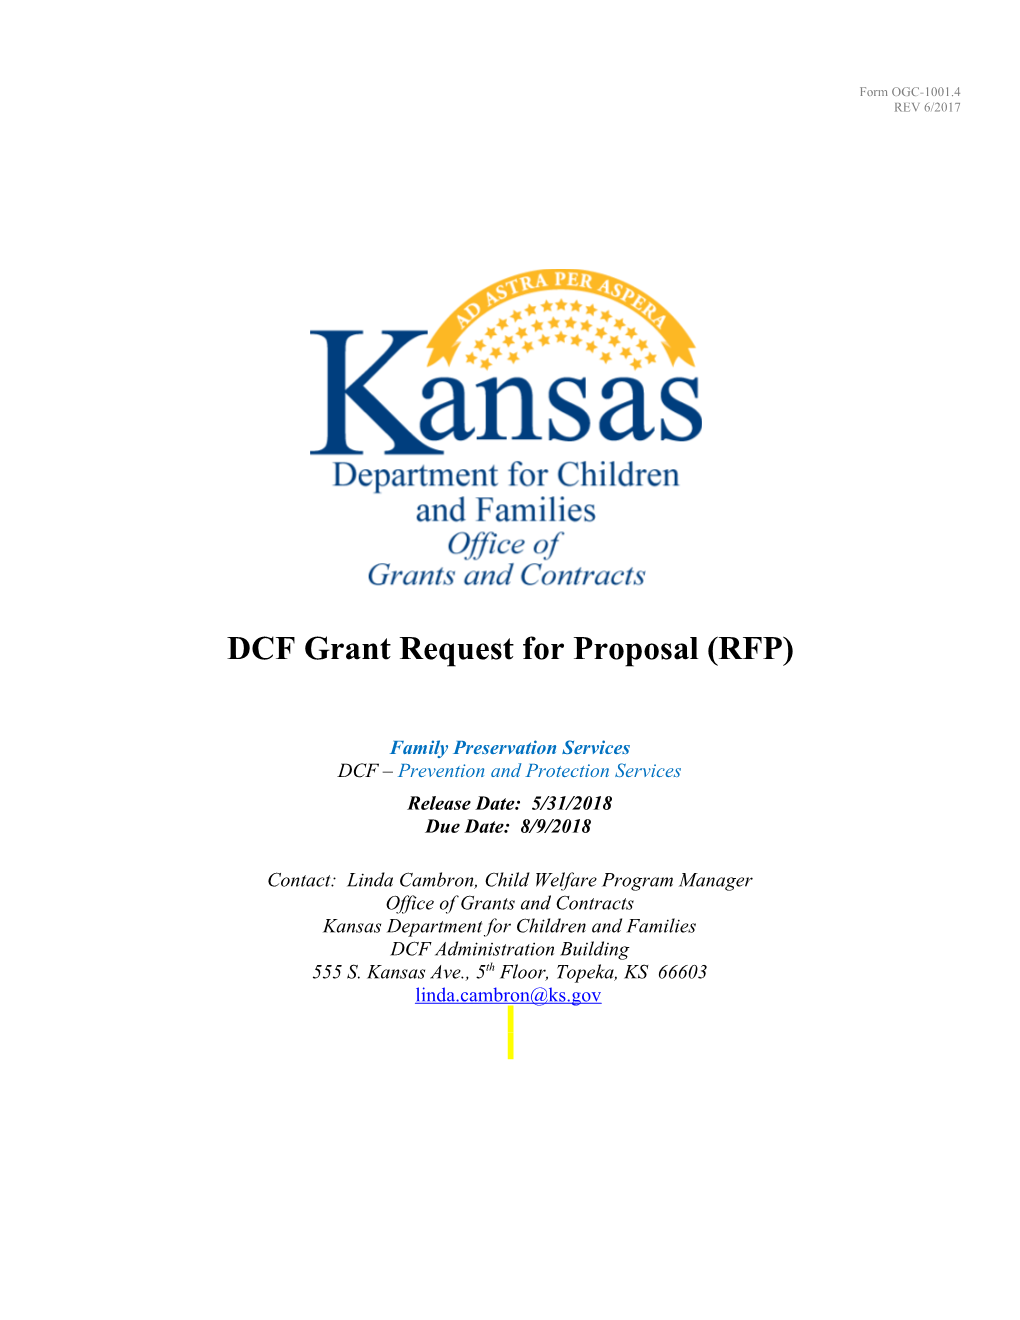 Family Preservation RFP